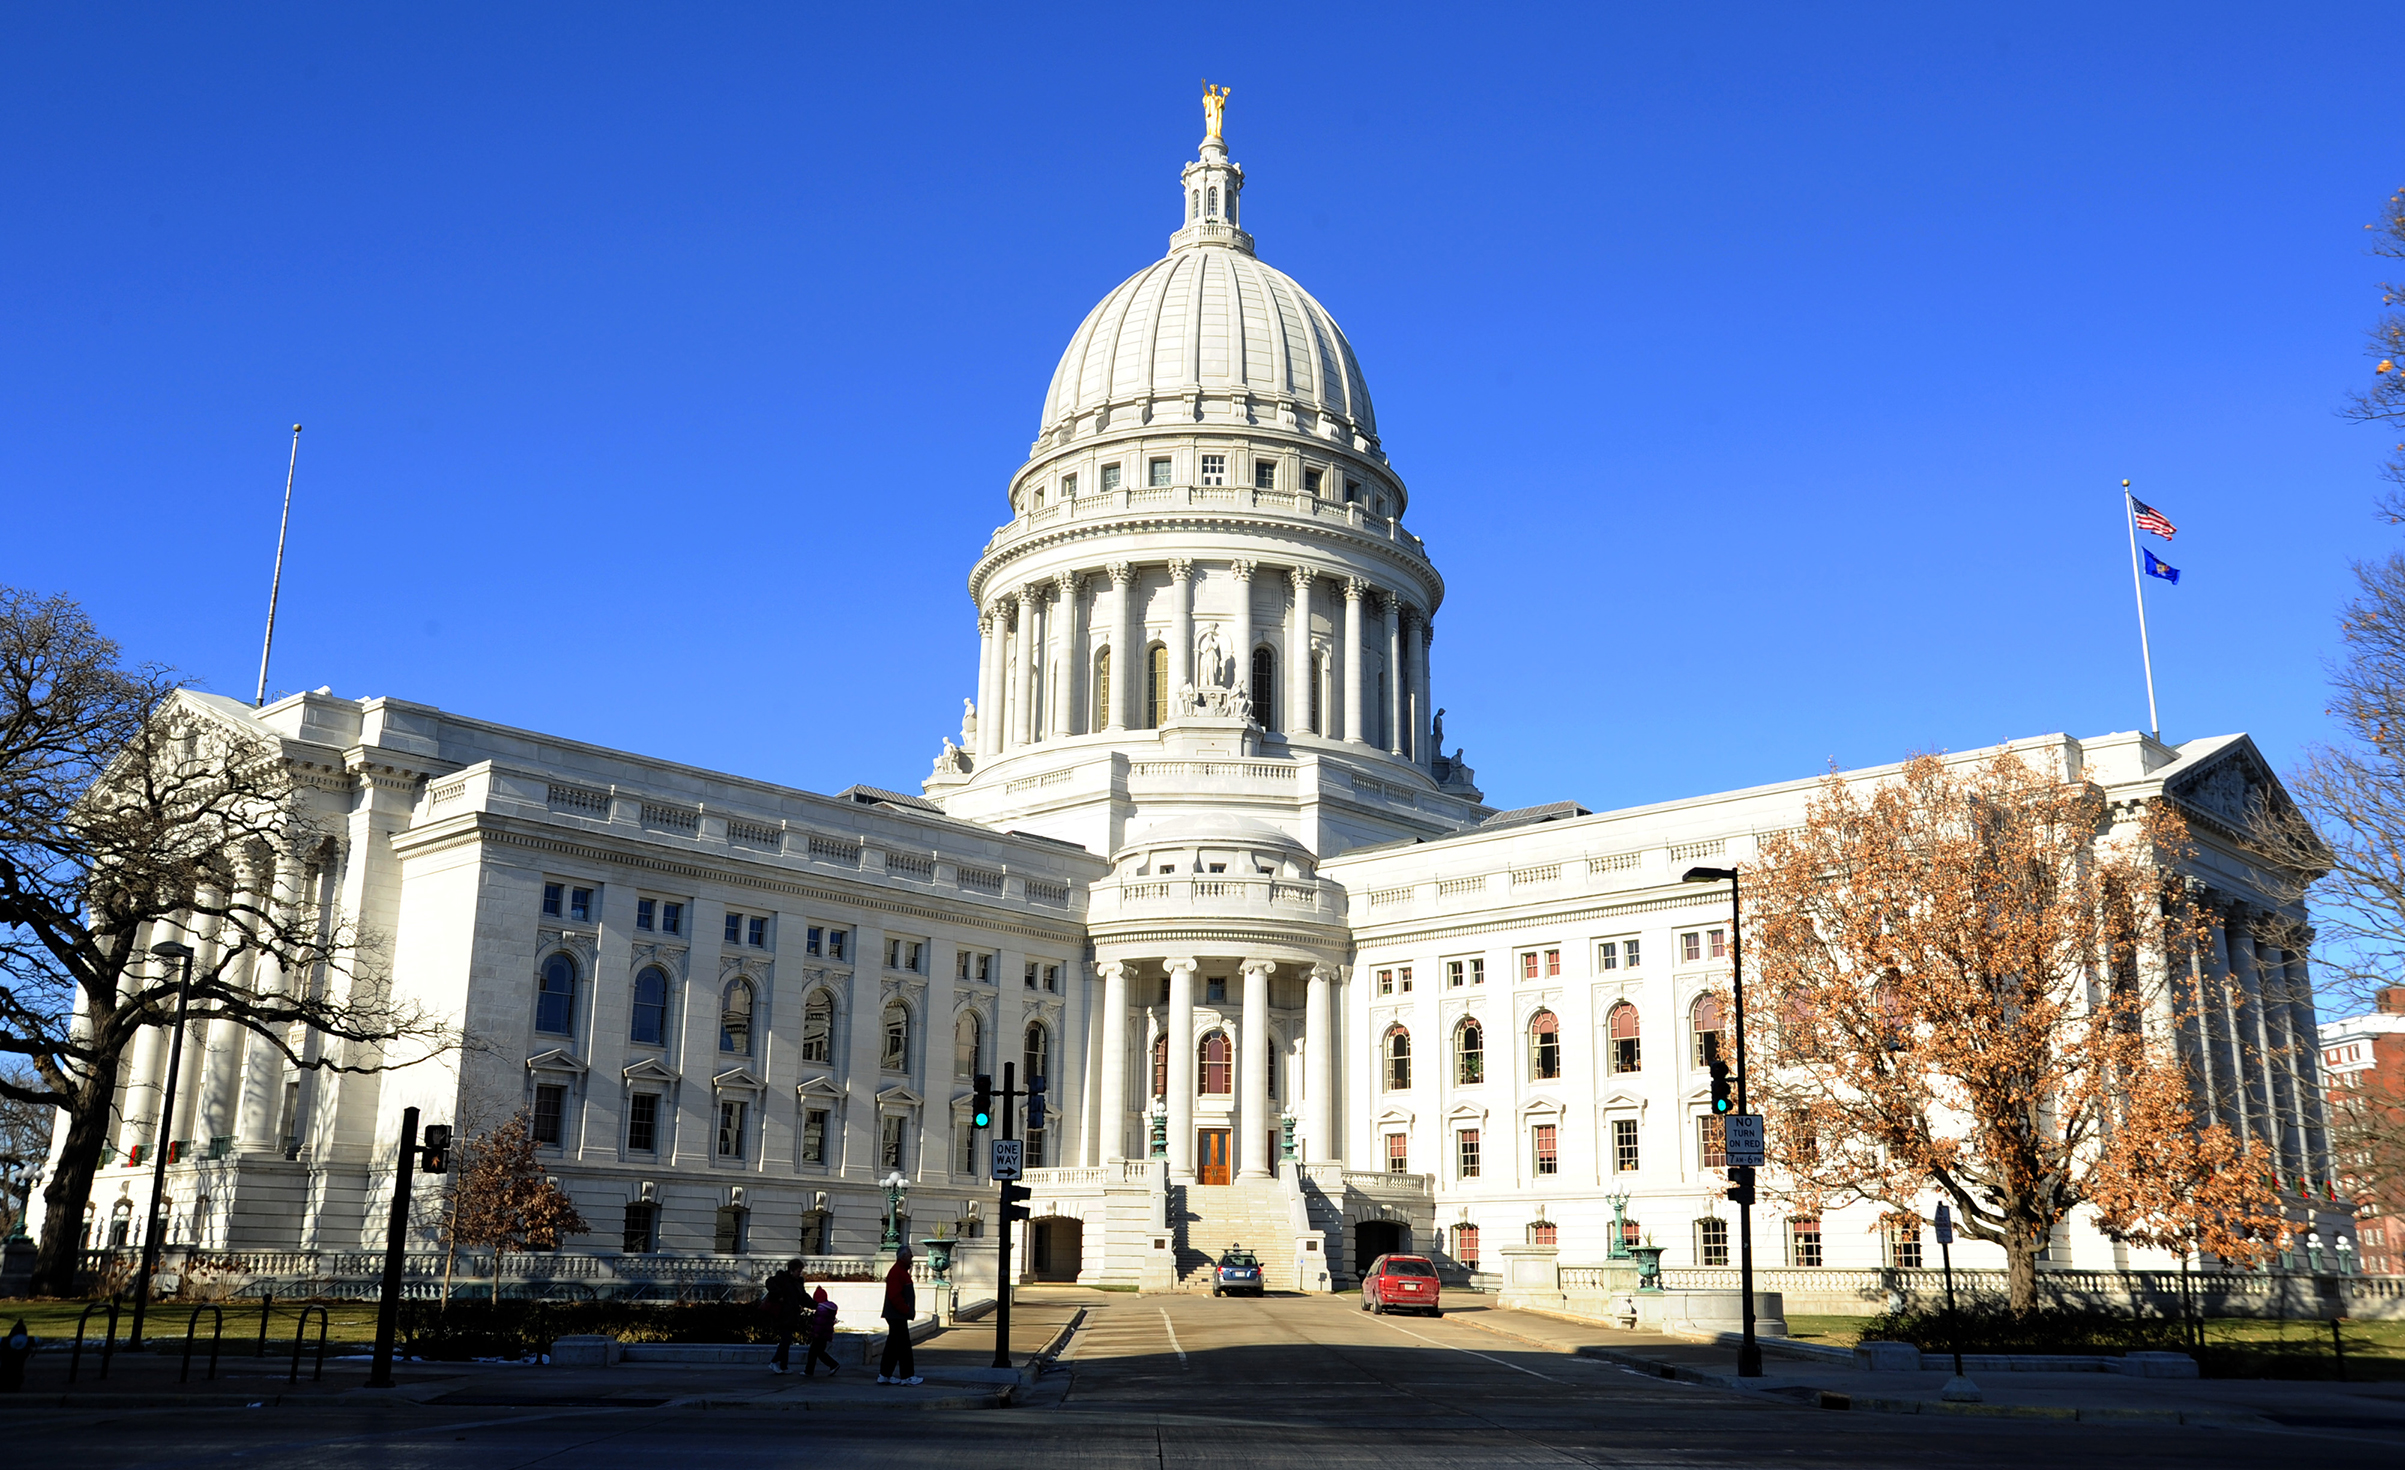 The Wisconsin State Capitol building on Madison, Wisconsin on Dec. 24, 2011. (Karen Bleier—AFP/Getty Images)